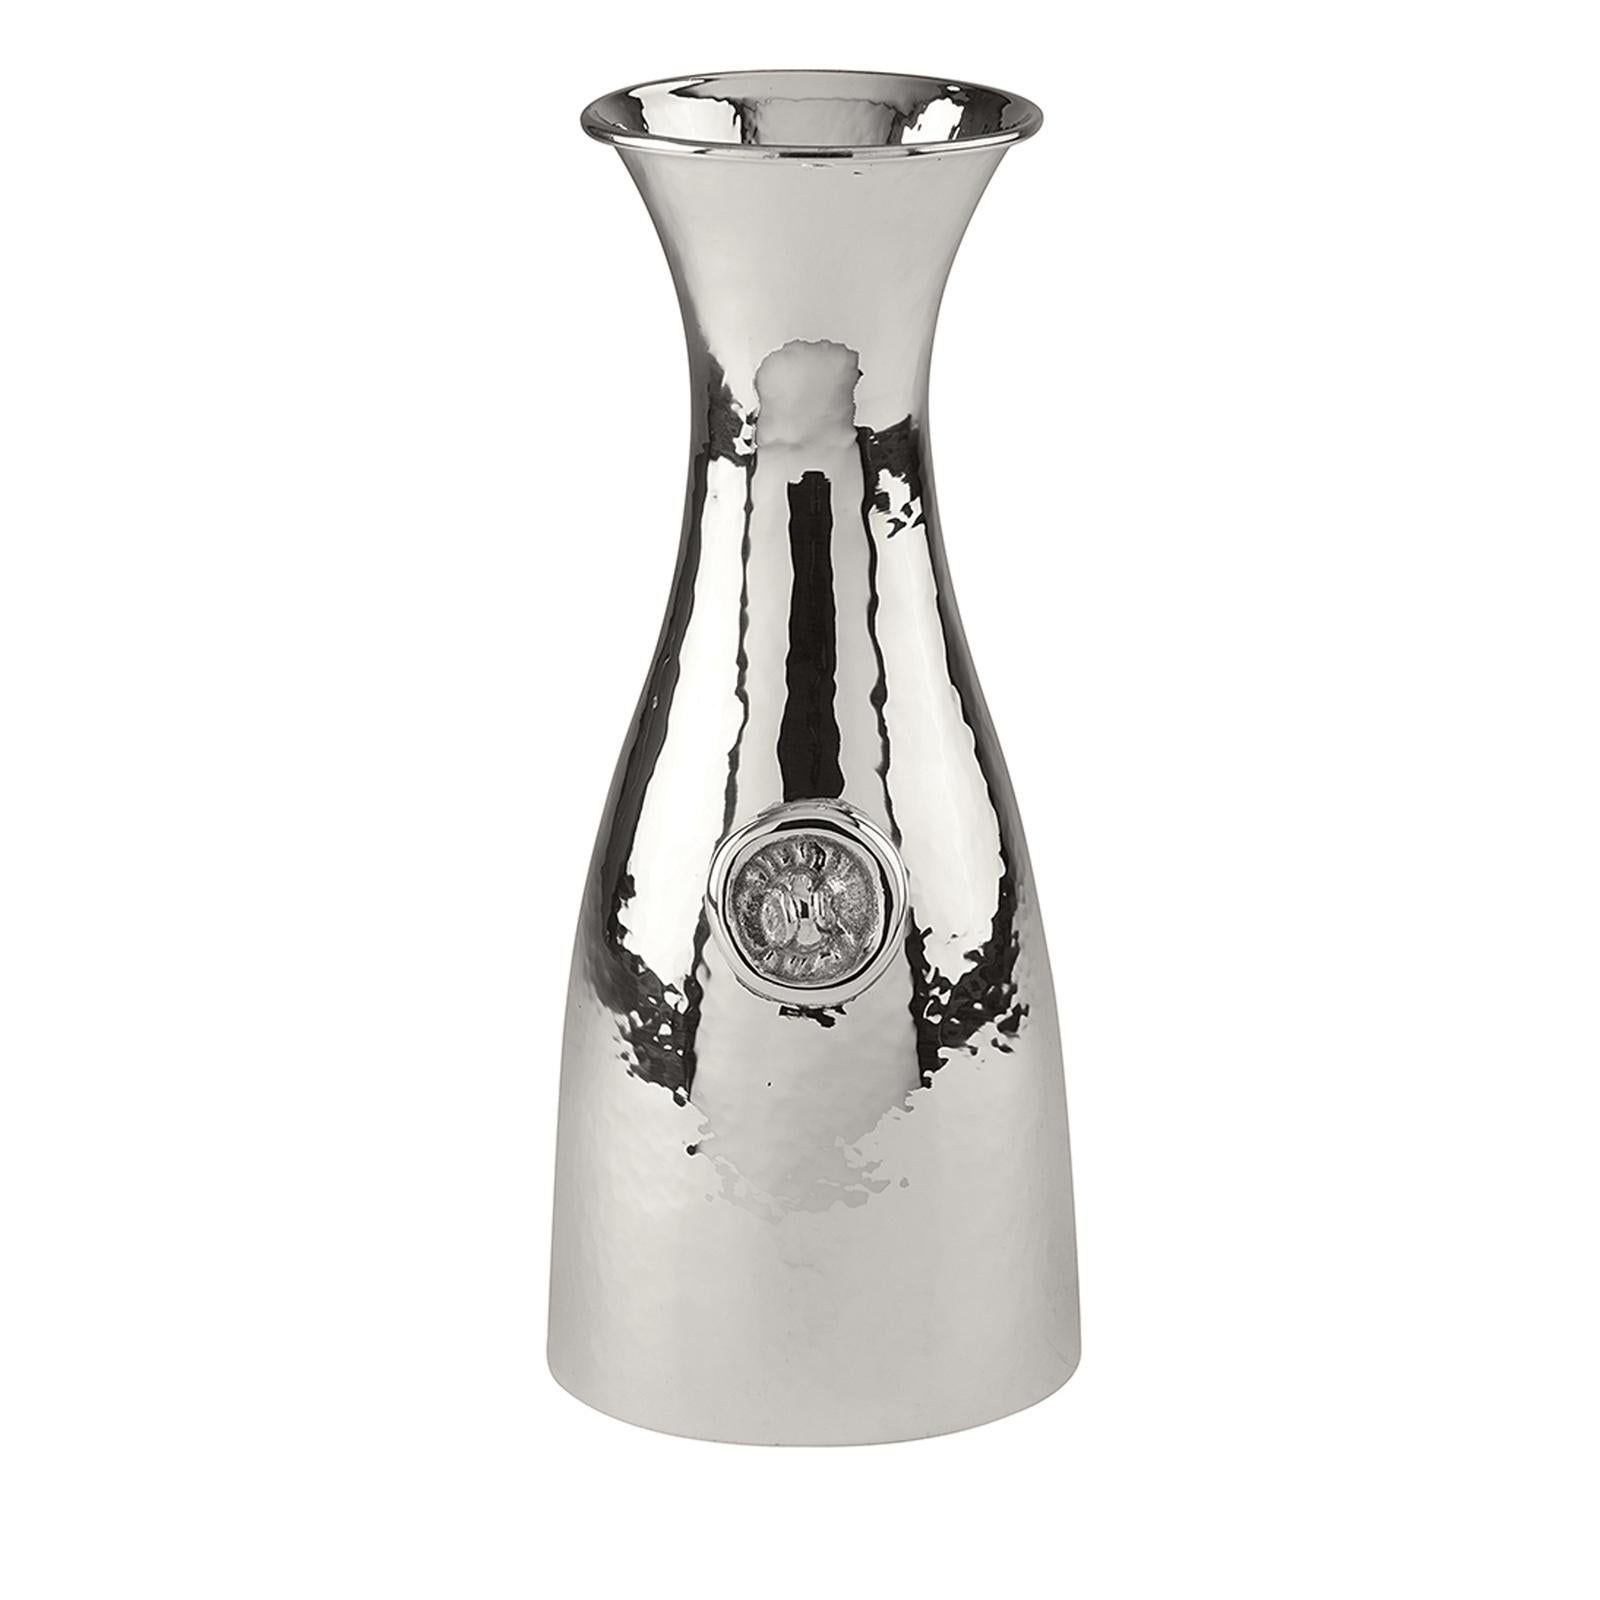 This elegant interpretation of an iconic dinner table object is made entirely in silver. The Classic one-litre bottle, that is a staple of old-fashioned trattorie throughout Italy, is given a sophisticated upgrade. The surface of the silver was